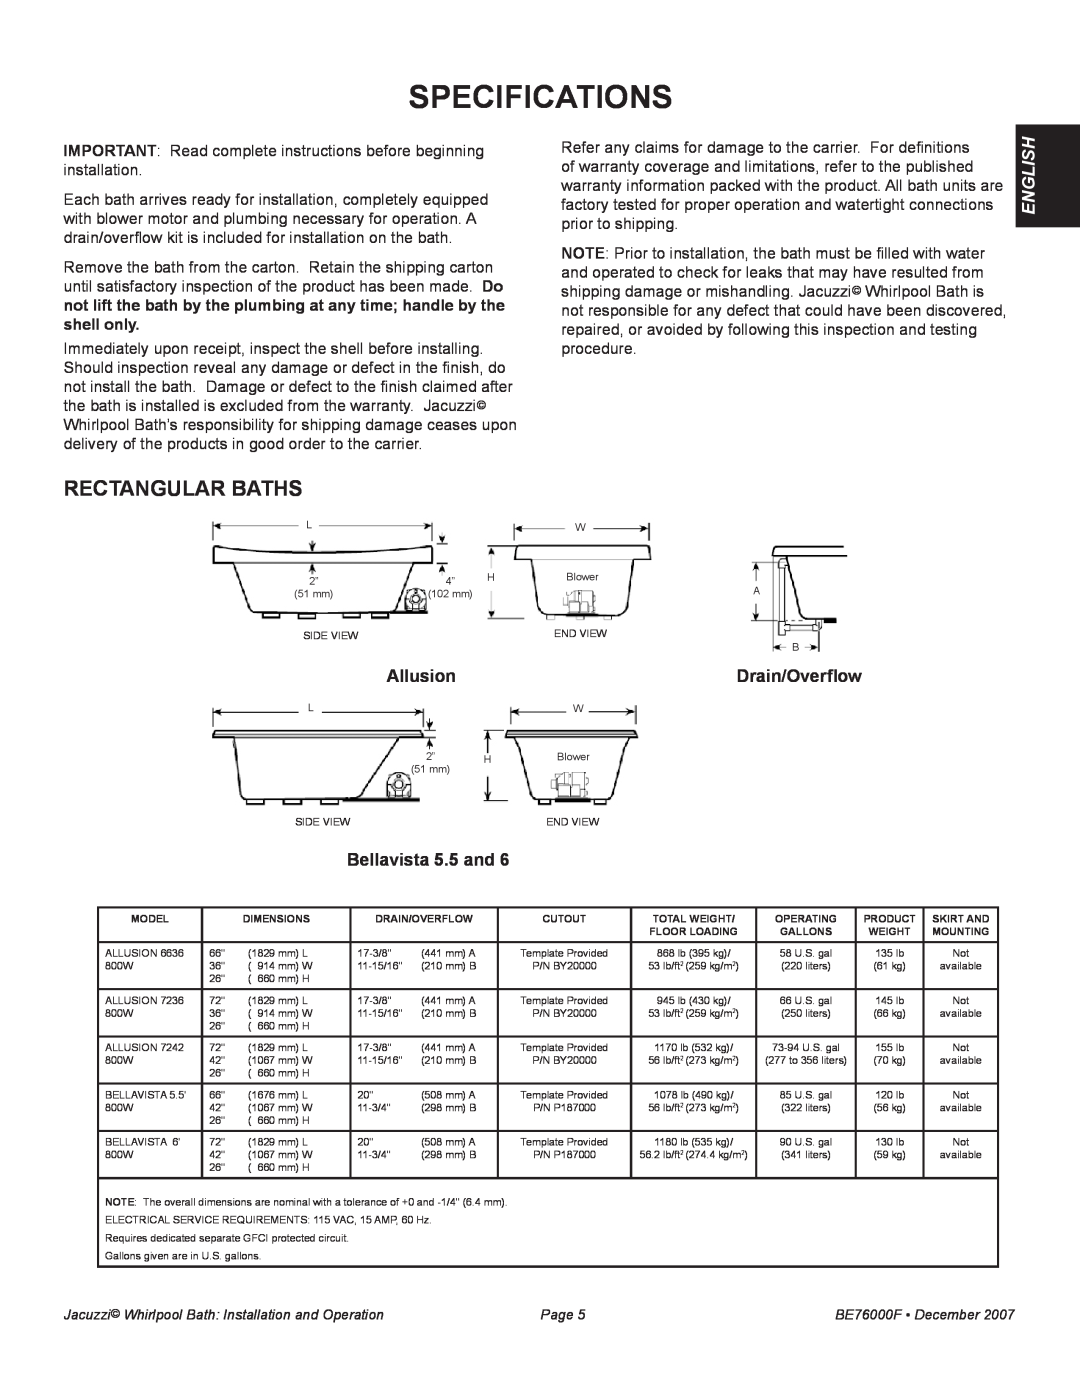 Jacuzzi LUXURY SERIES manual Specifications, Rectangular Baths, Allusion, Drain/Overflow, Bellavista 5.5 and, English 